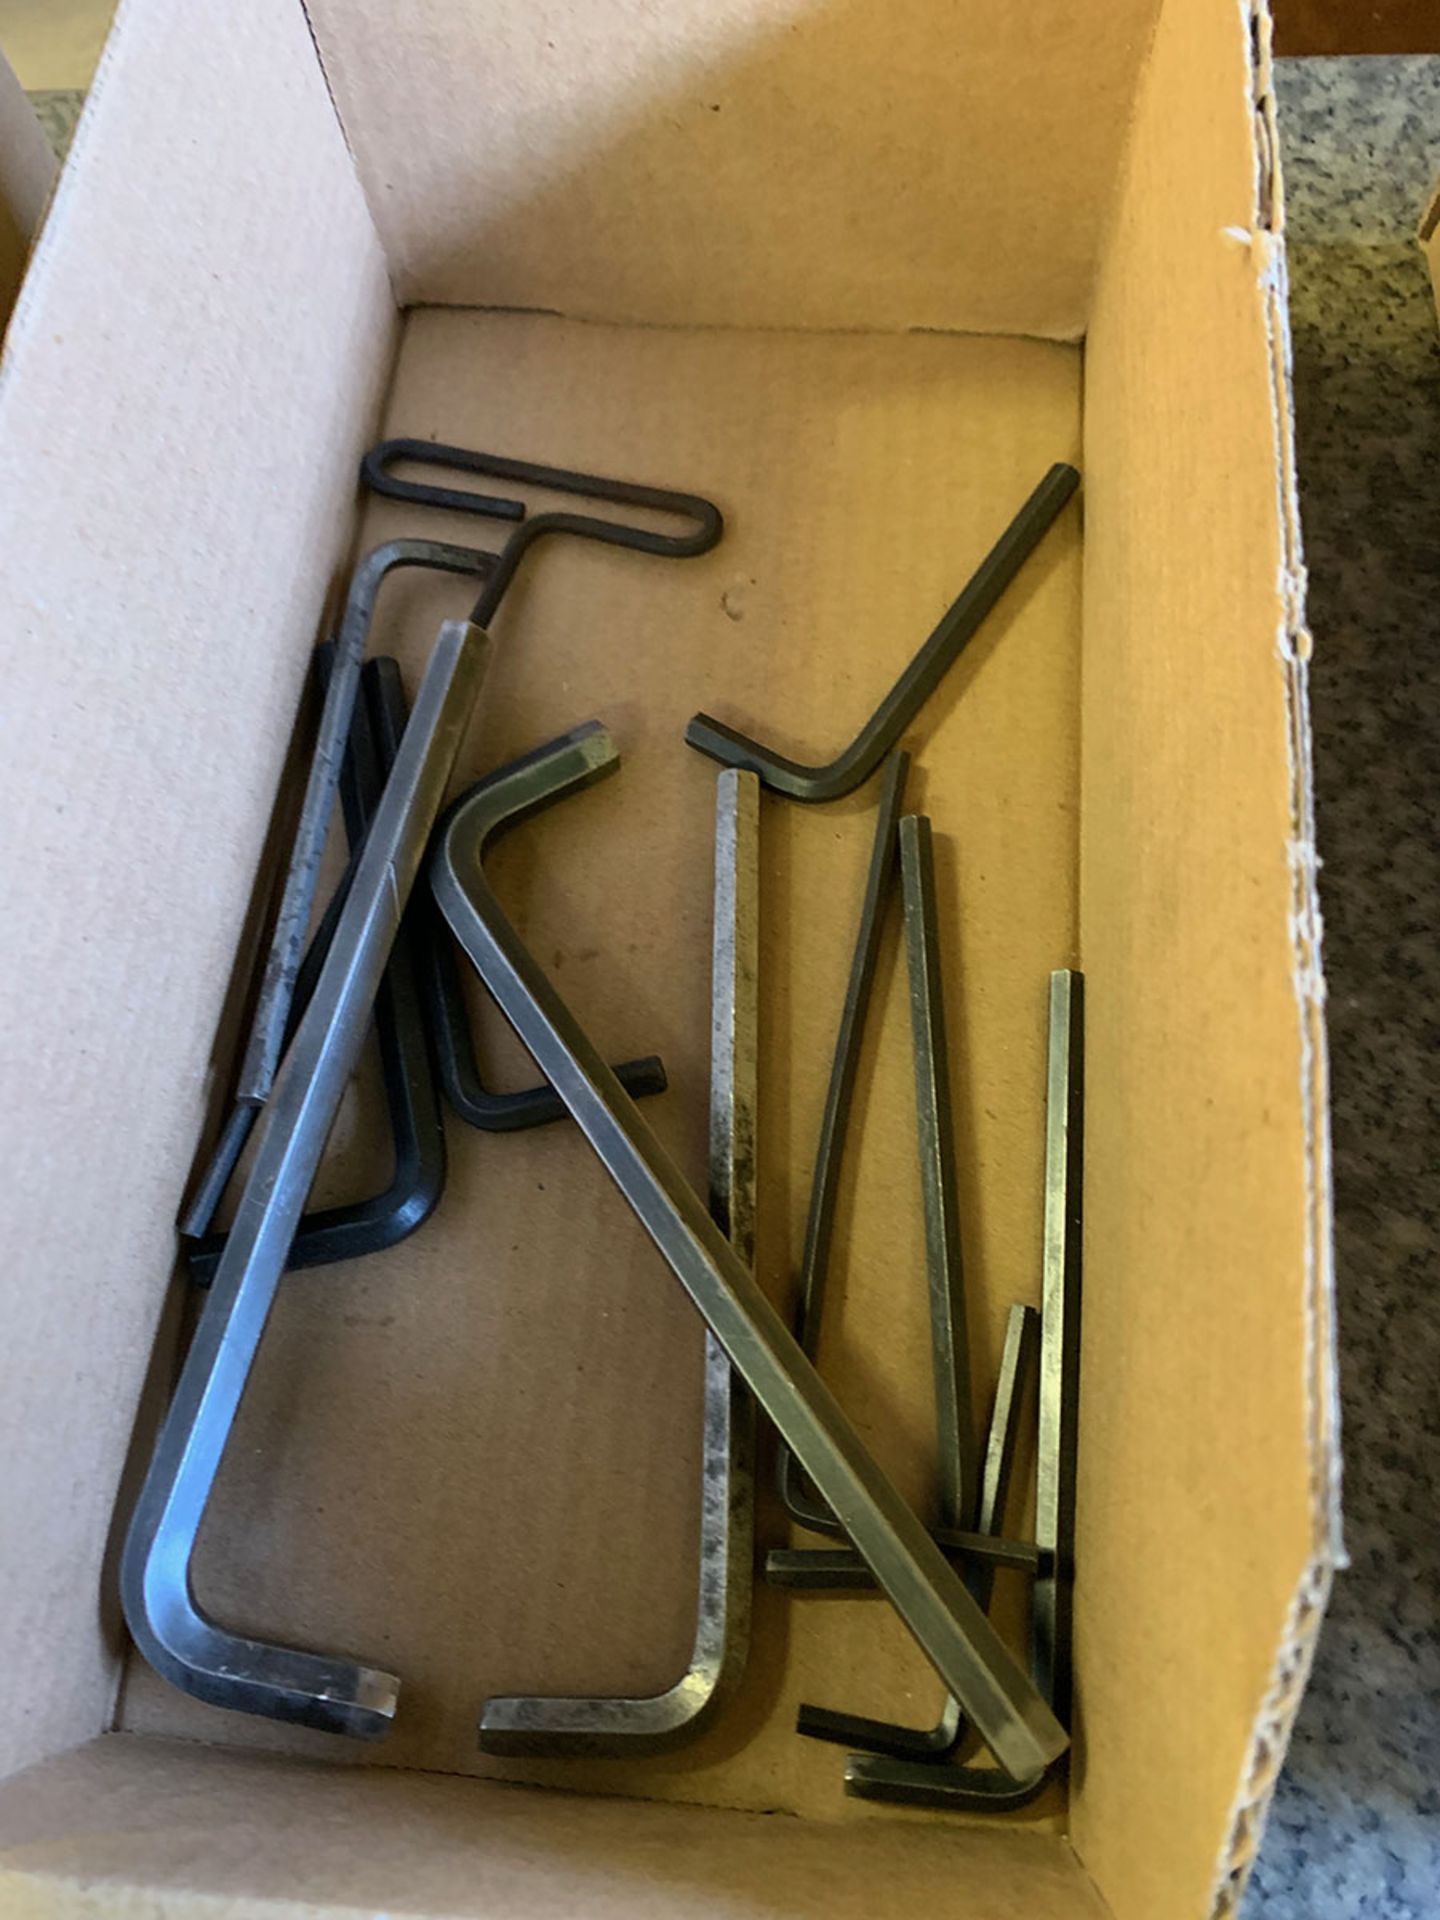 LOT OF ALLEN WRENCHES